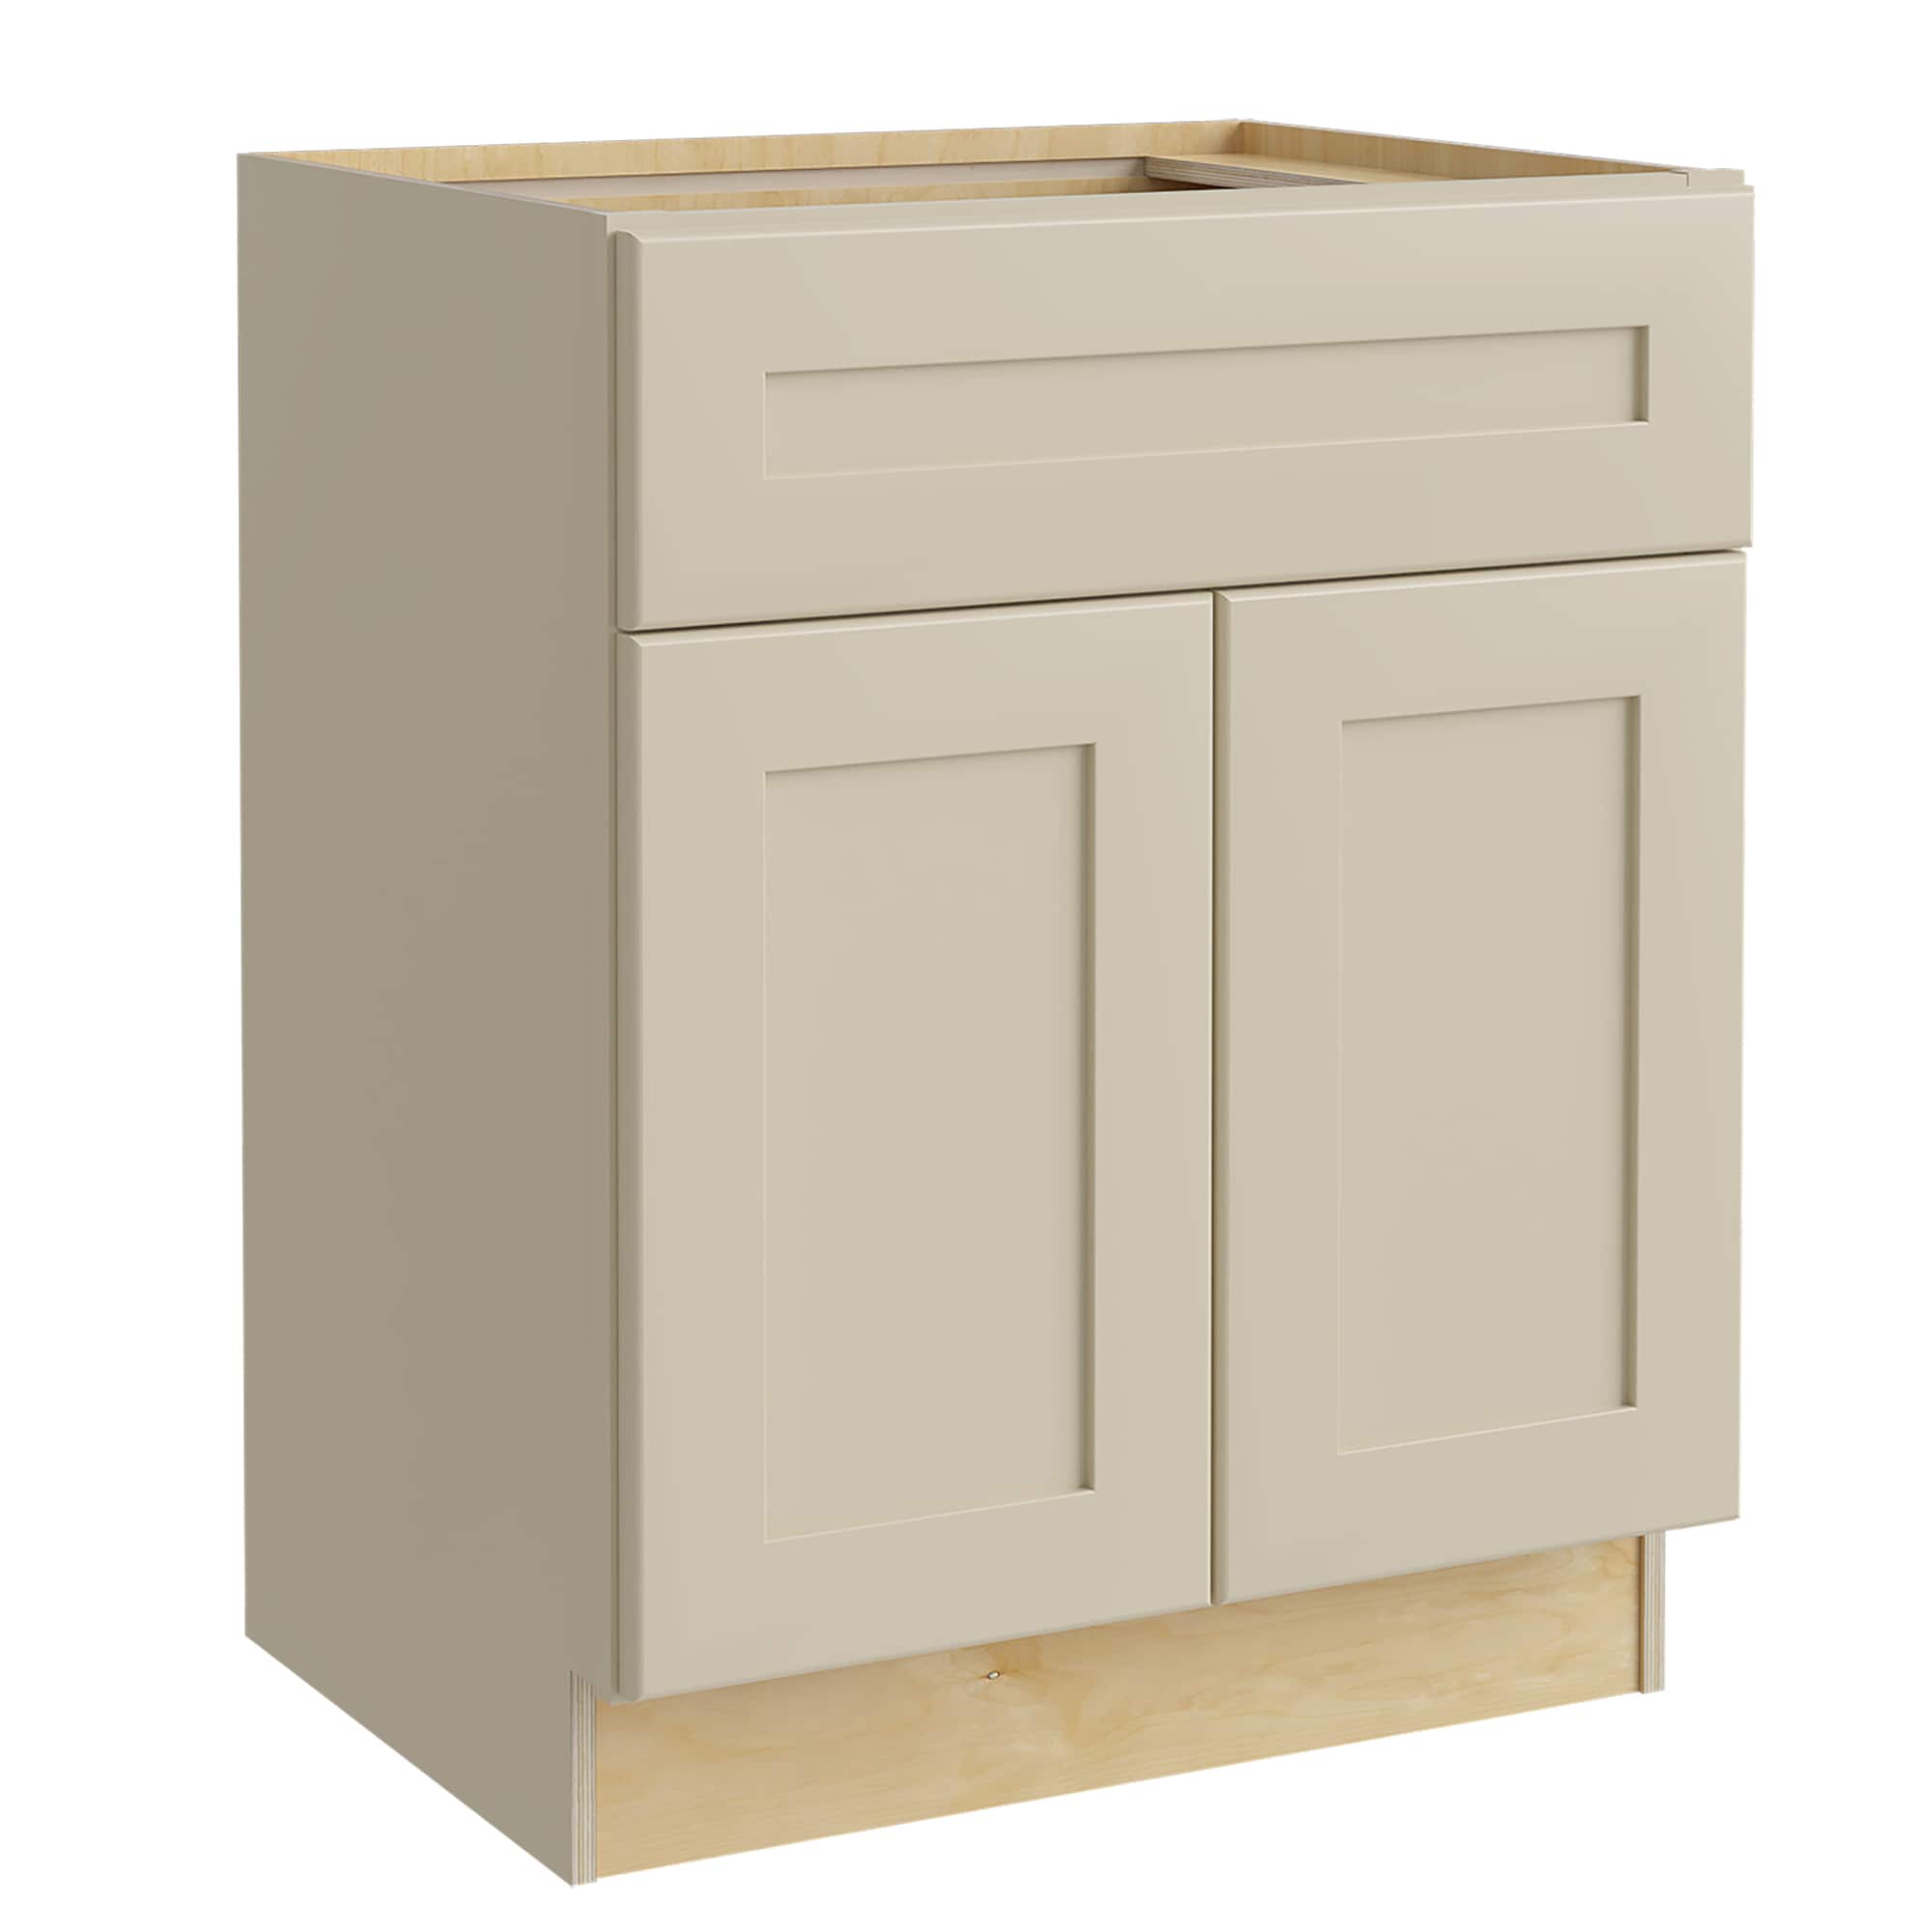 Luxxe Cabinetry 30-in W x 34.5-in H x 24-in D Norfolk Blended Cream Painted Sink Base Fully Assembled Semi-custom Cabinet in Off-White | SB30-NBC